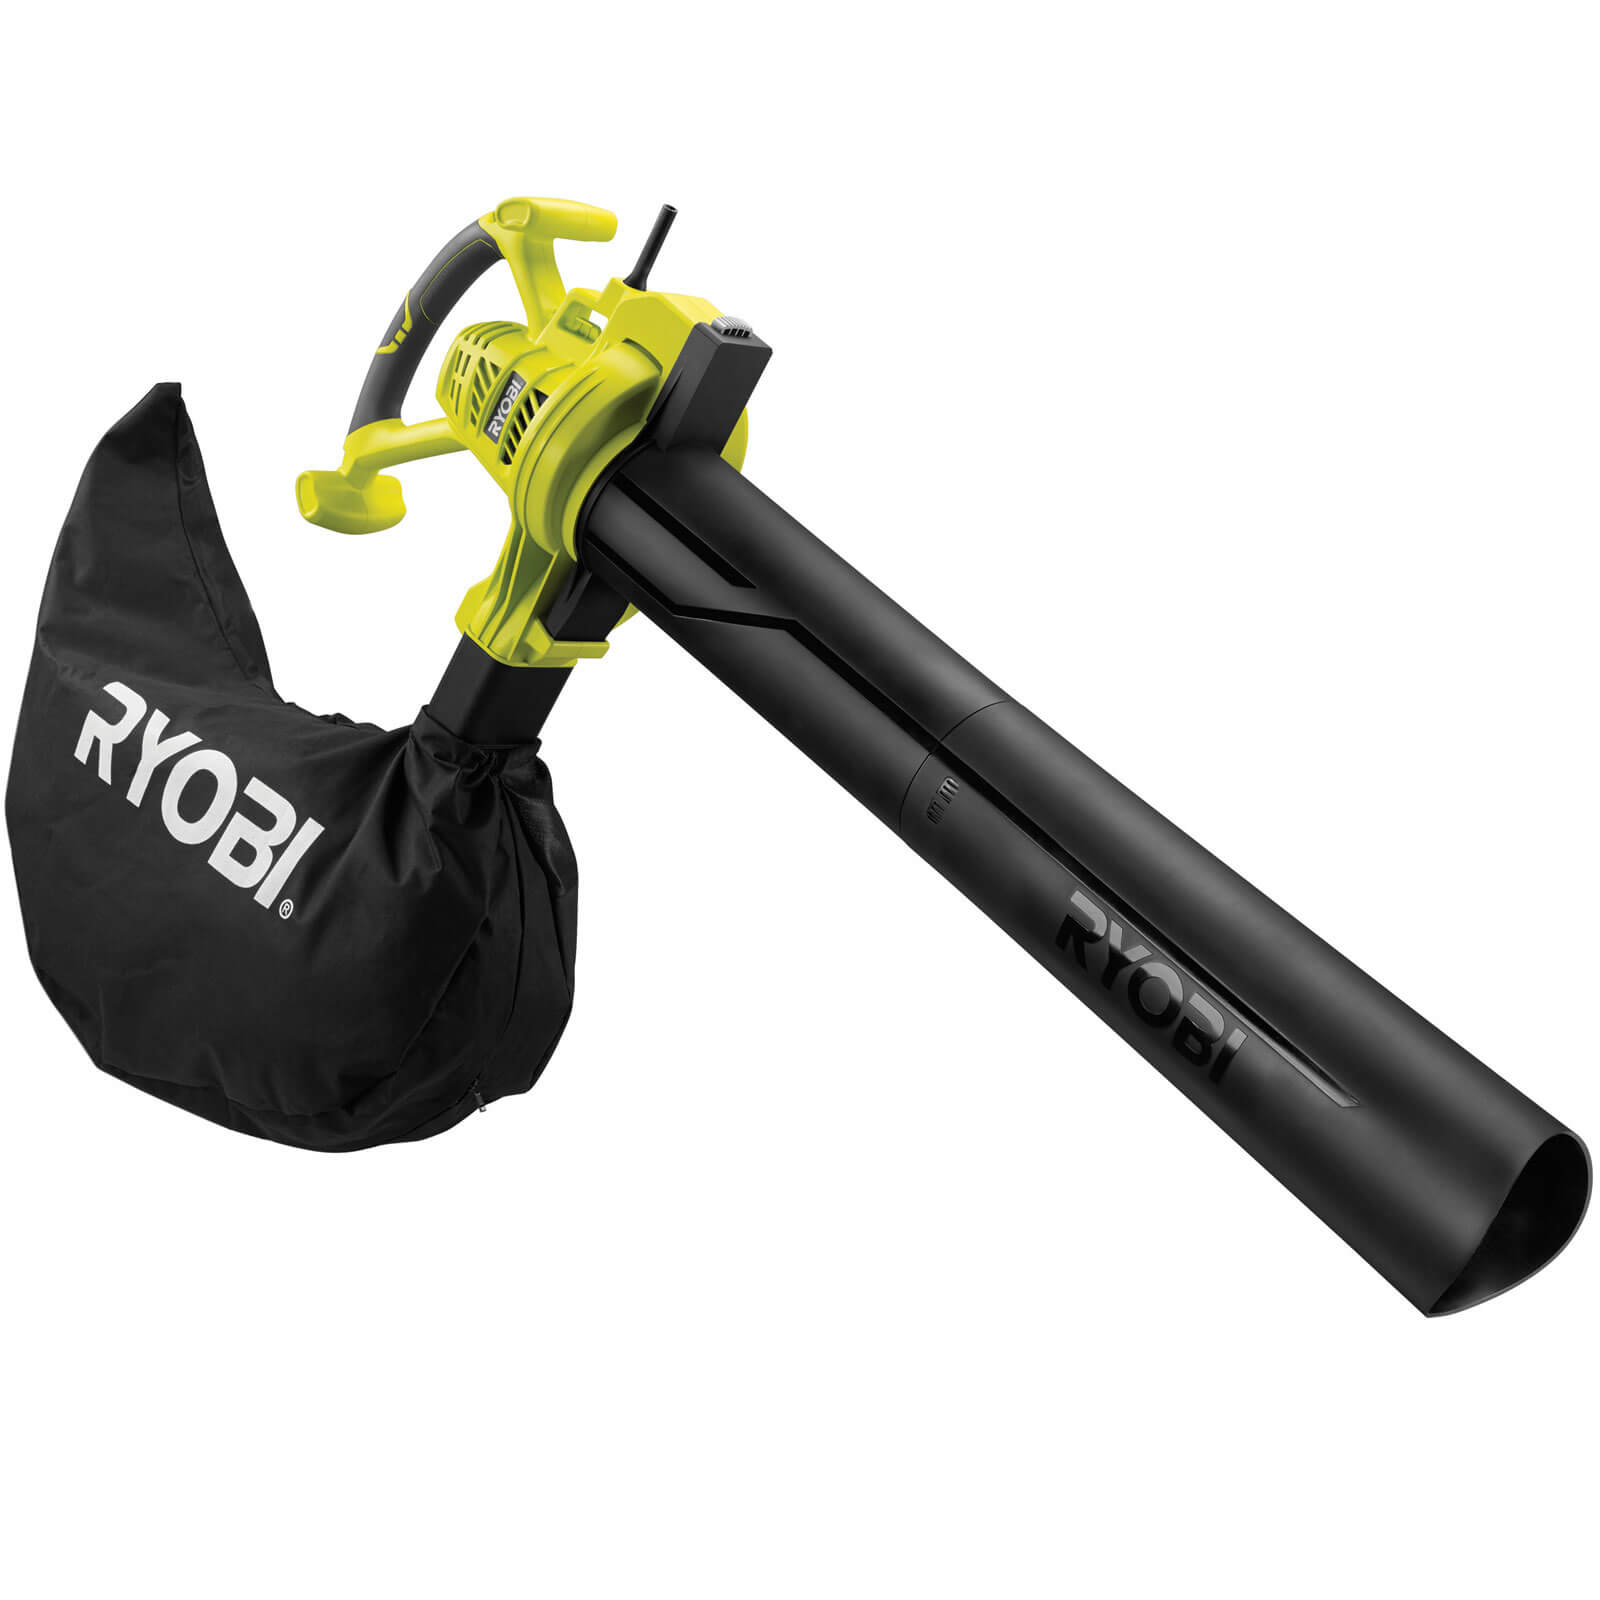 Ryobi Rbv3000csv Garden Vacuum And Leaf Blower With Variable Speed 3000w 240v Rhyvee